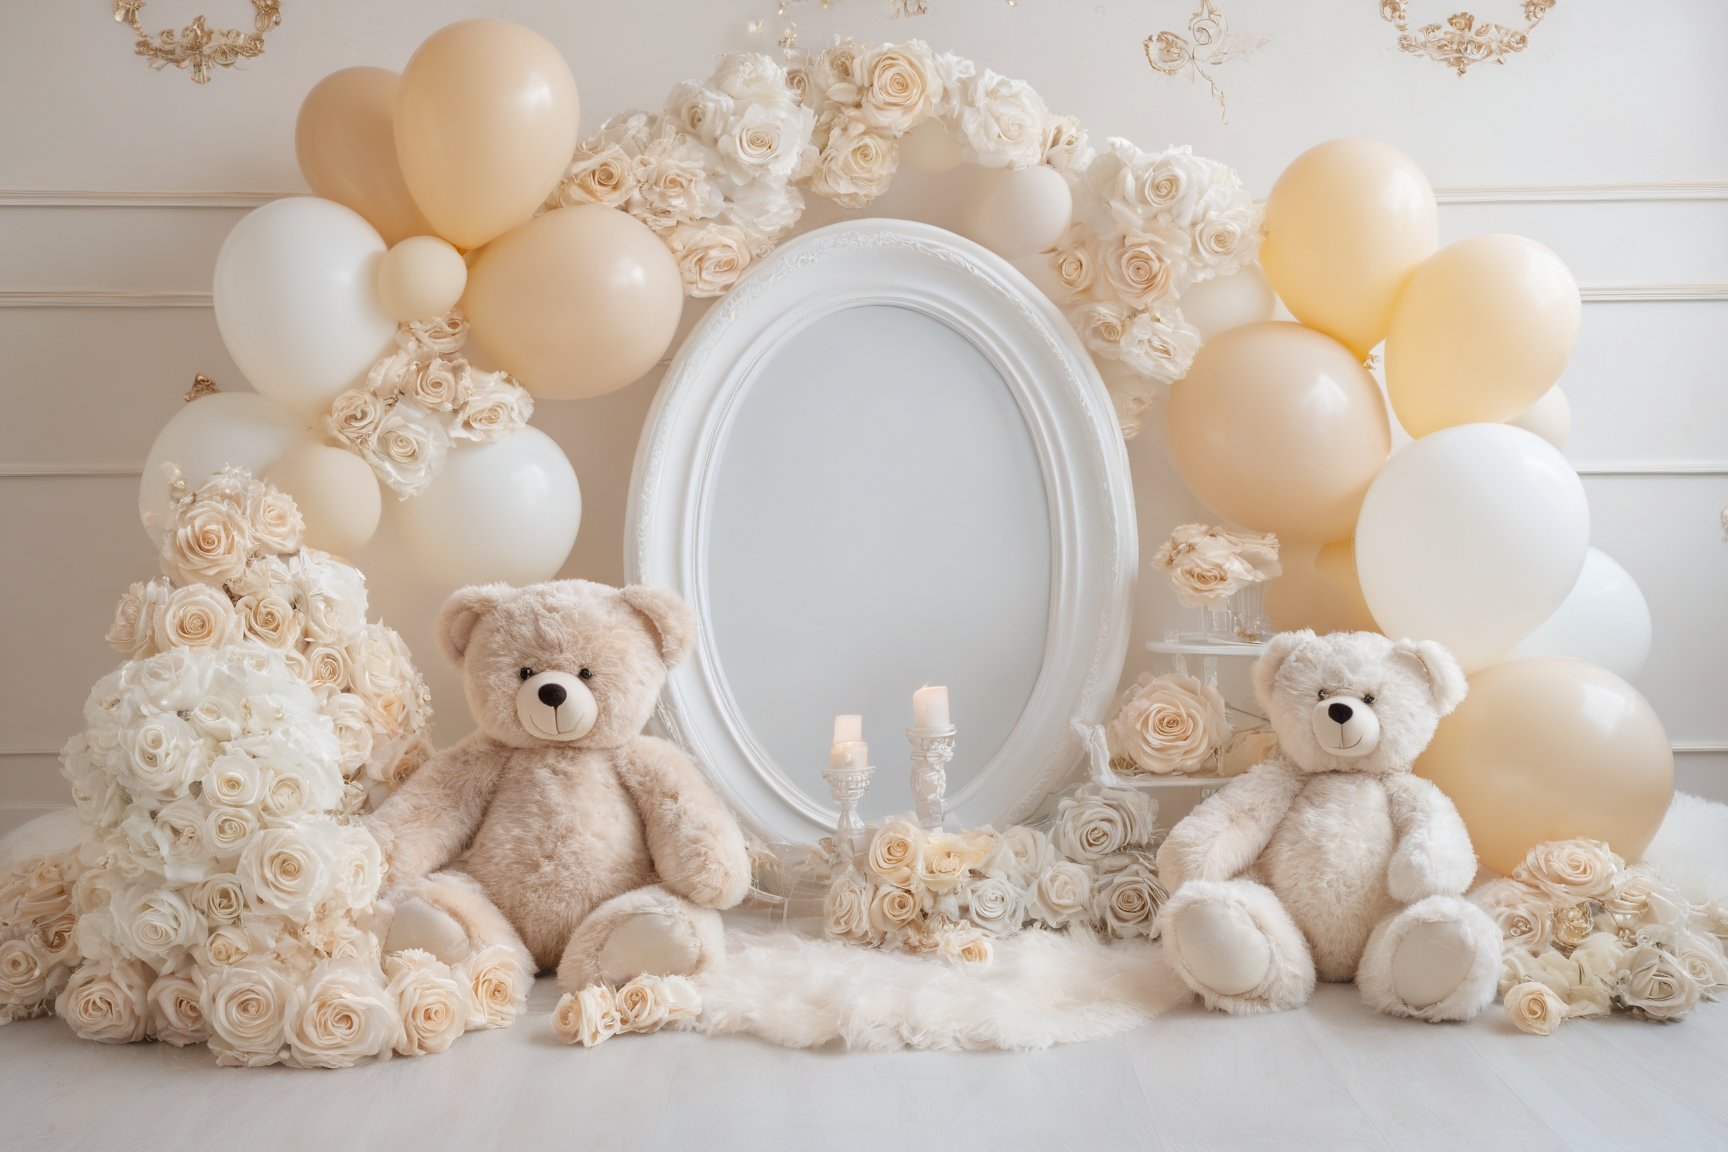 A serene and elegant setting, dominated by soft pastel colors. Two teddy bears, one larger and one smaller, are seated in the foreground, with the larger one positioned in front of an oval mirror frame. Surrounding them are balloons in shades of white, gold, and beige, some of which are adorned with decorative elements like sequins. The floor is carpeted with a fluffy white material, and scattered around are white roses and daisies. The backdrop features white walls with an ornate design, adding to the luxurious ambiance of the scene.